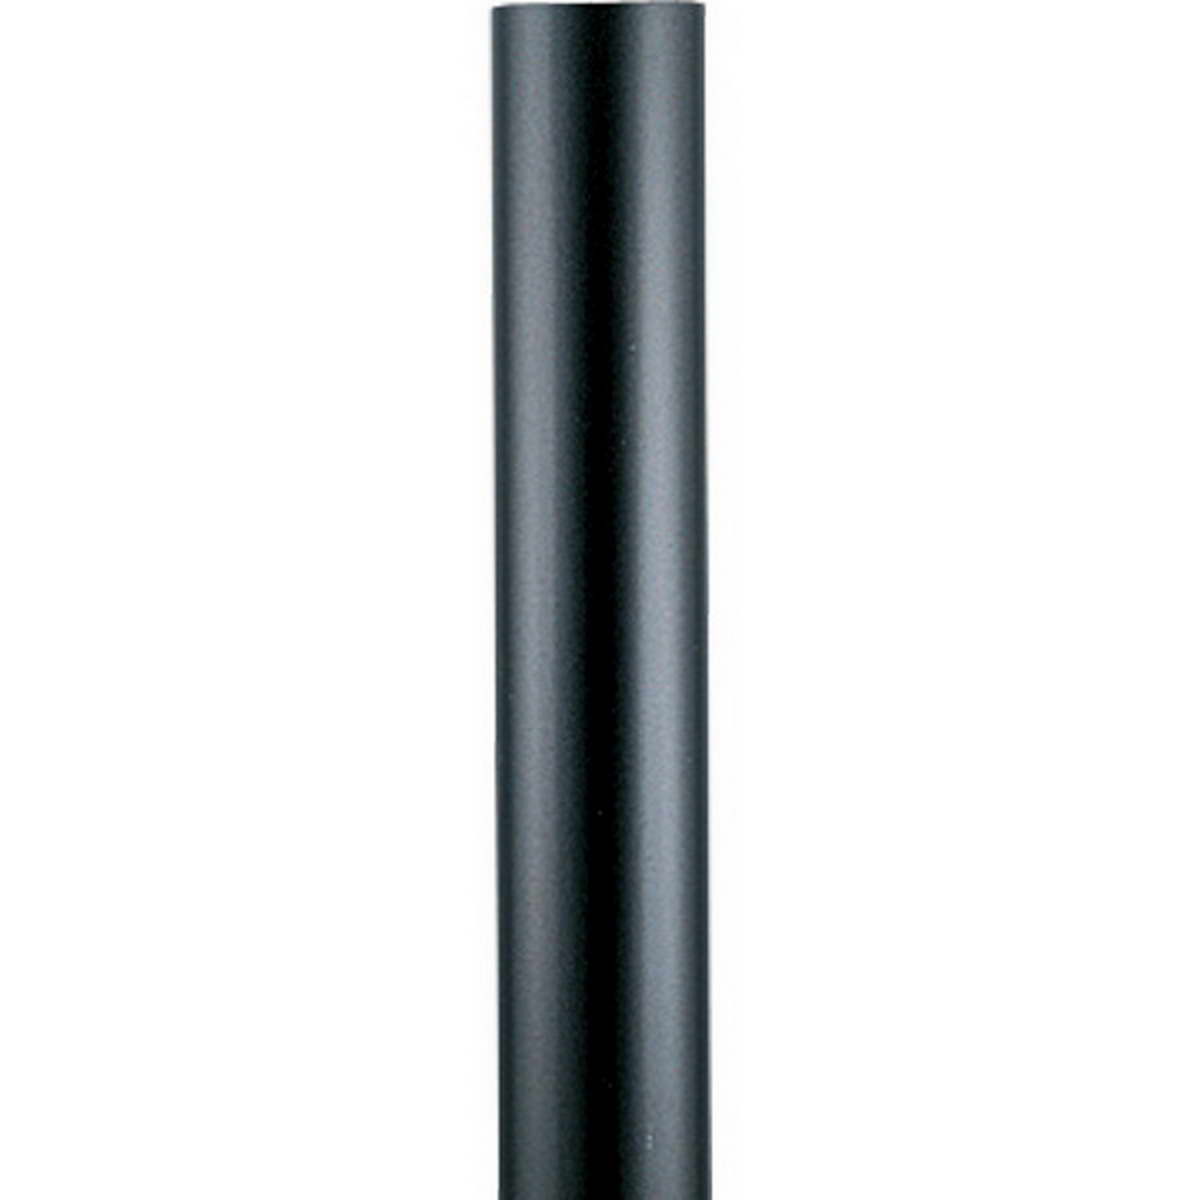 7 Ft Round Aluminum Direct Burial Pole 3 In. Shaft Black Finish